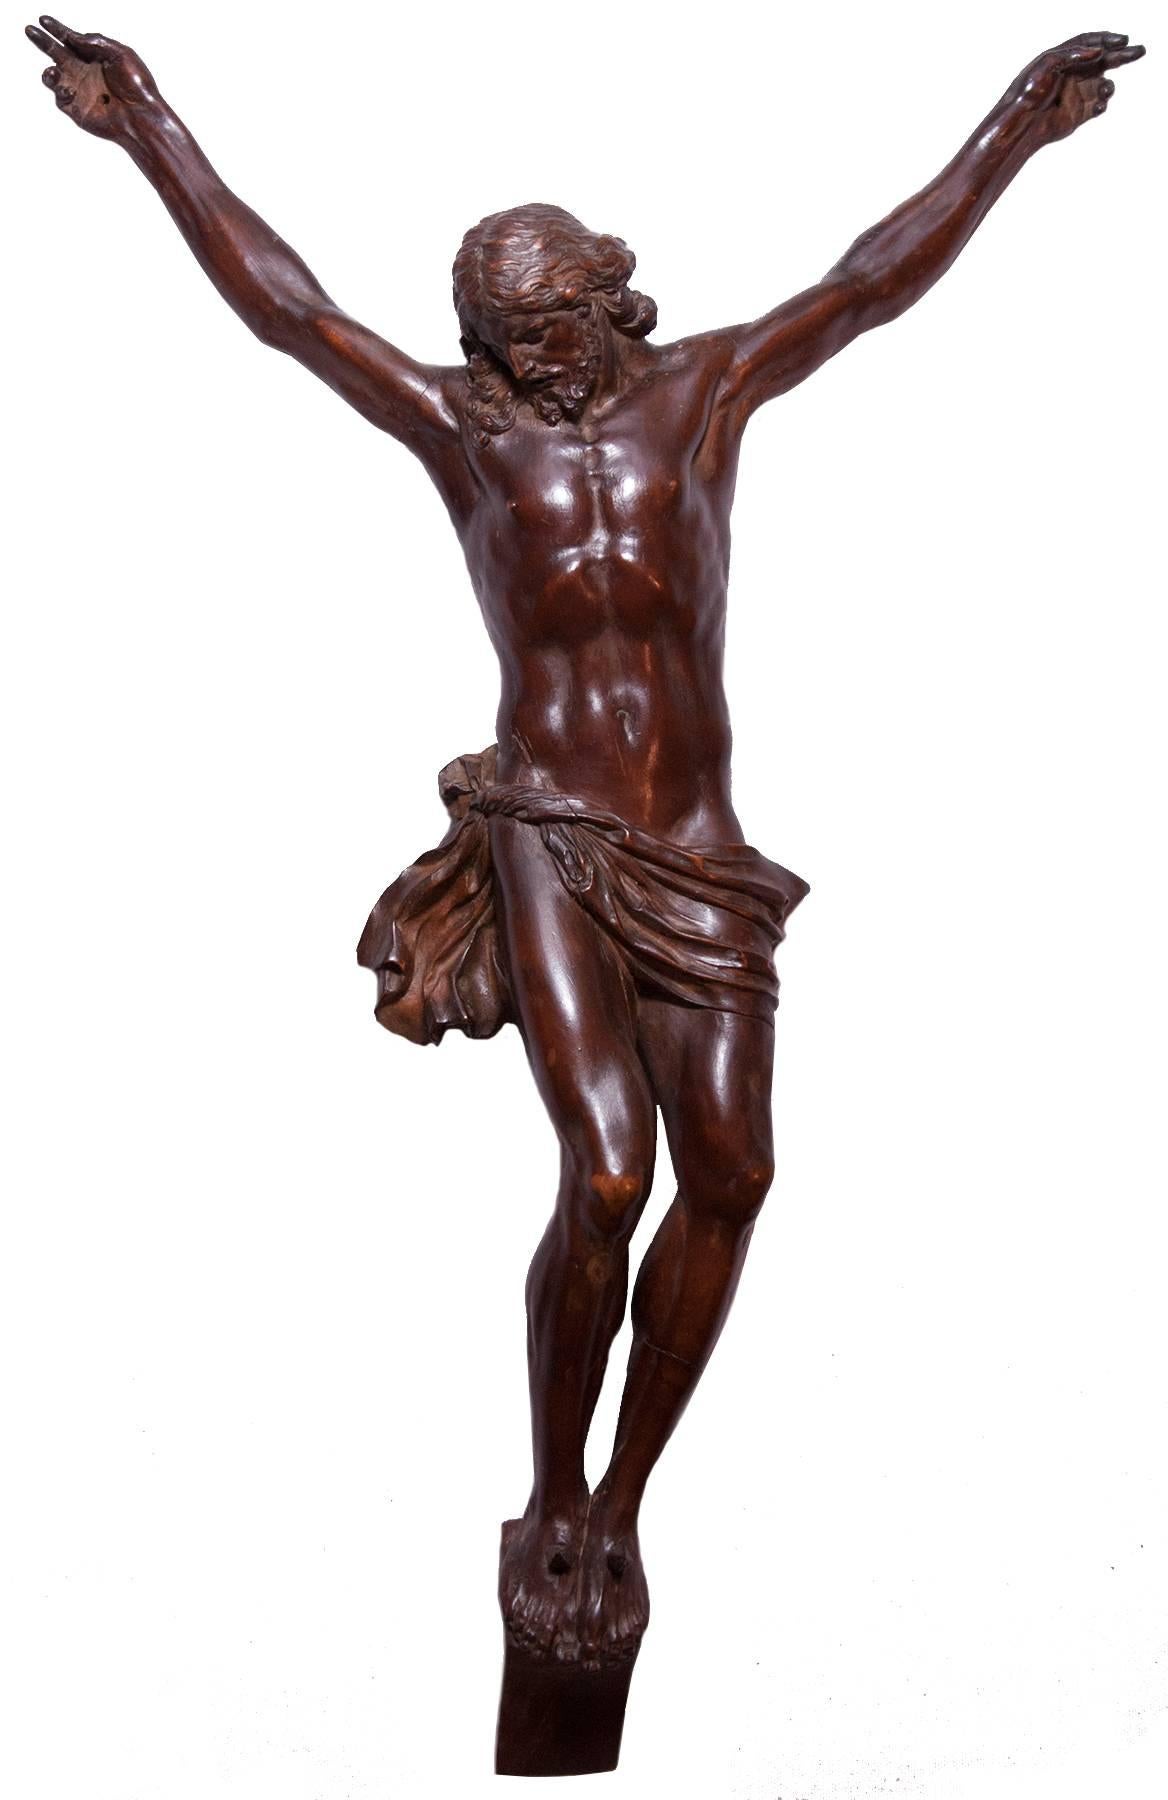 Unknown Figurative Sculpture - Large fruitwood Christ corpus, early 18th century